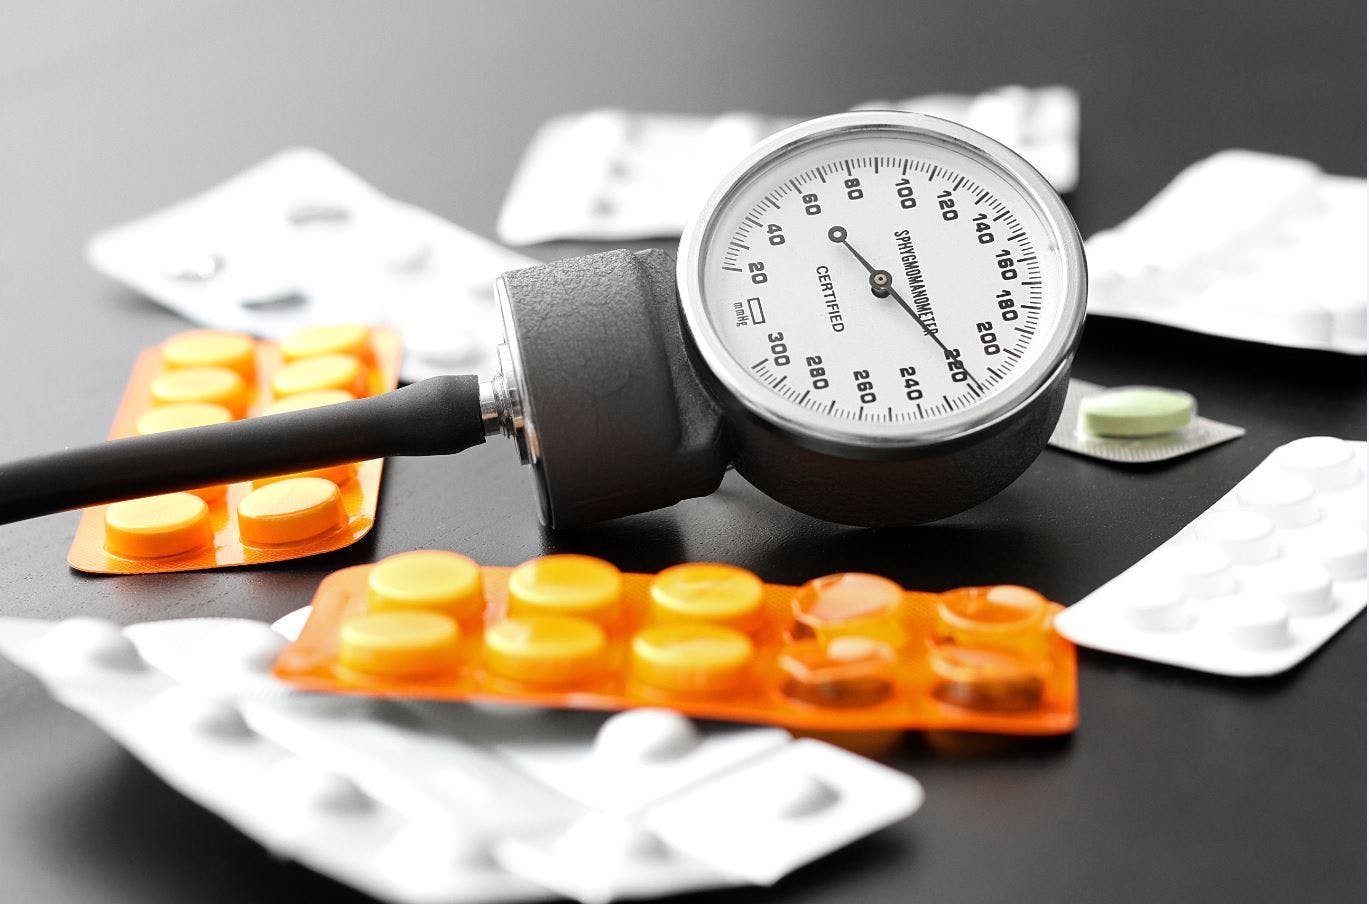 Personalized Treatment Found to Result in Greater Reductions in Blood Pressure in New Study